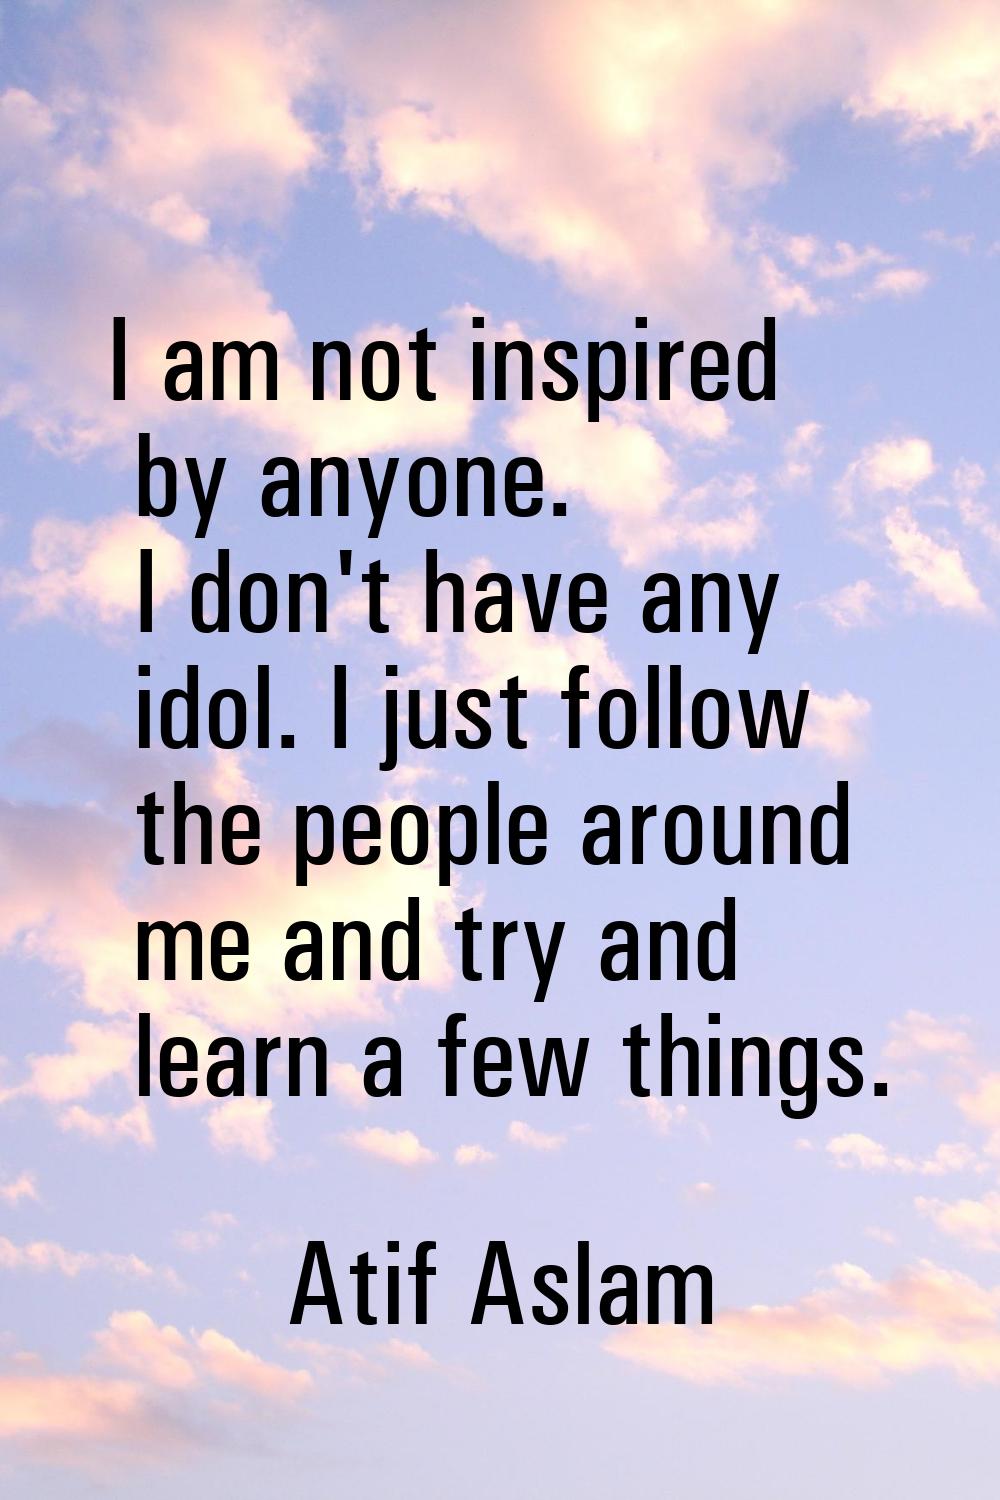 I am not inspired by anyone. I don't have any idol. I just follow the people around me and try and 